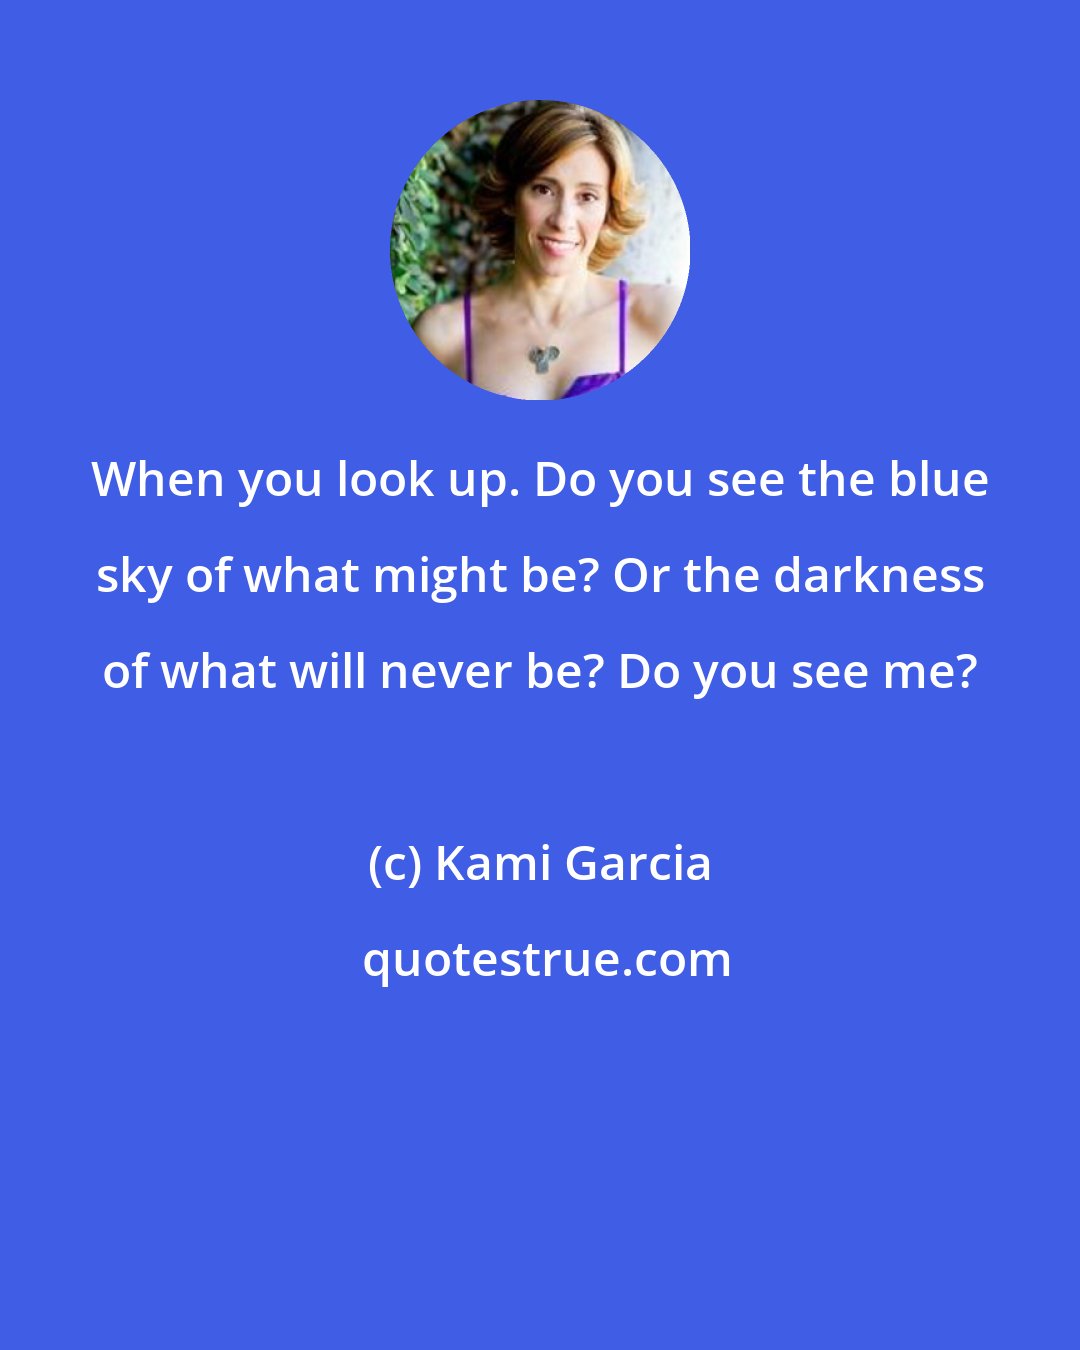 Kami Garcia: When you look up. Do you see the blue sky of what might be? Or the darkness of what will never be? Do you see me?